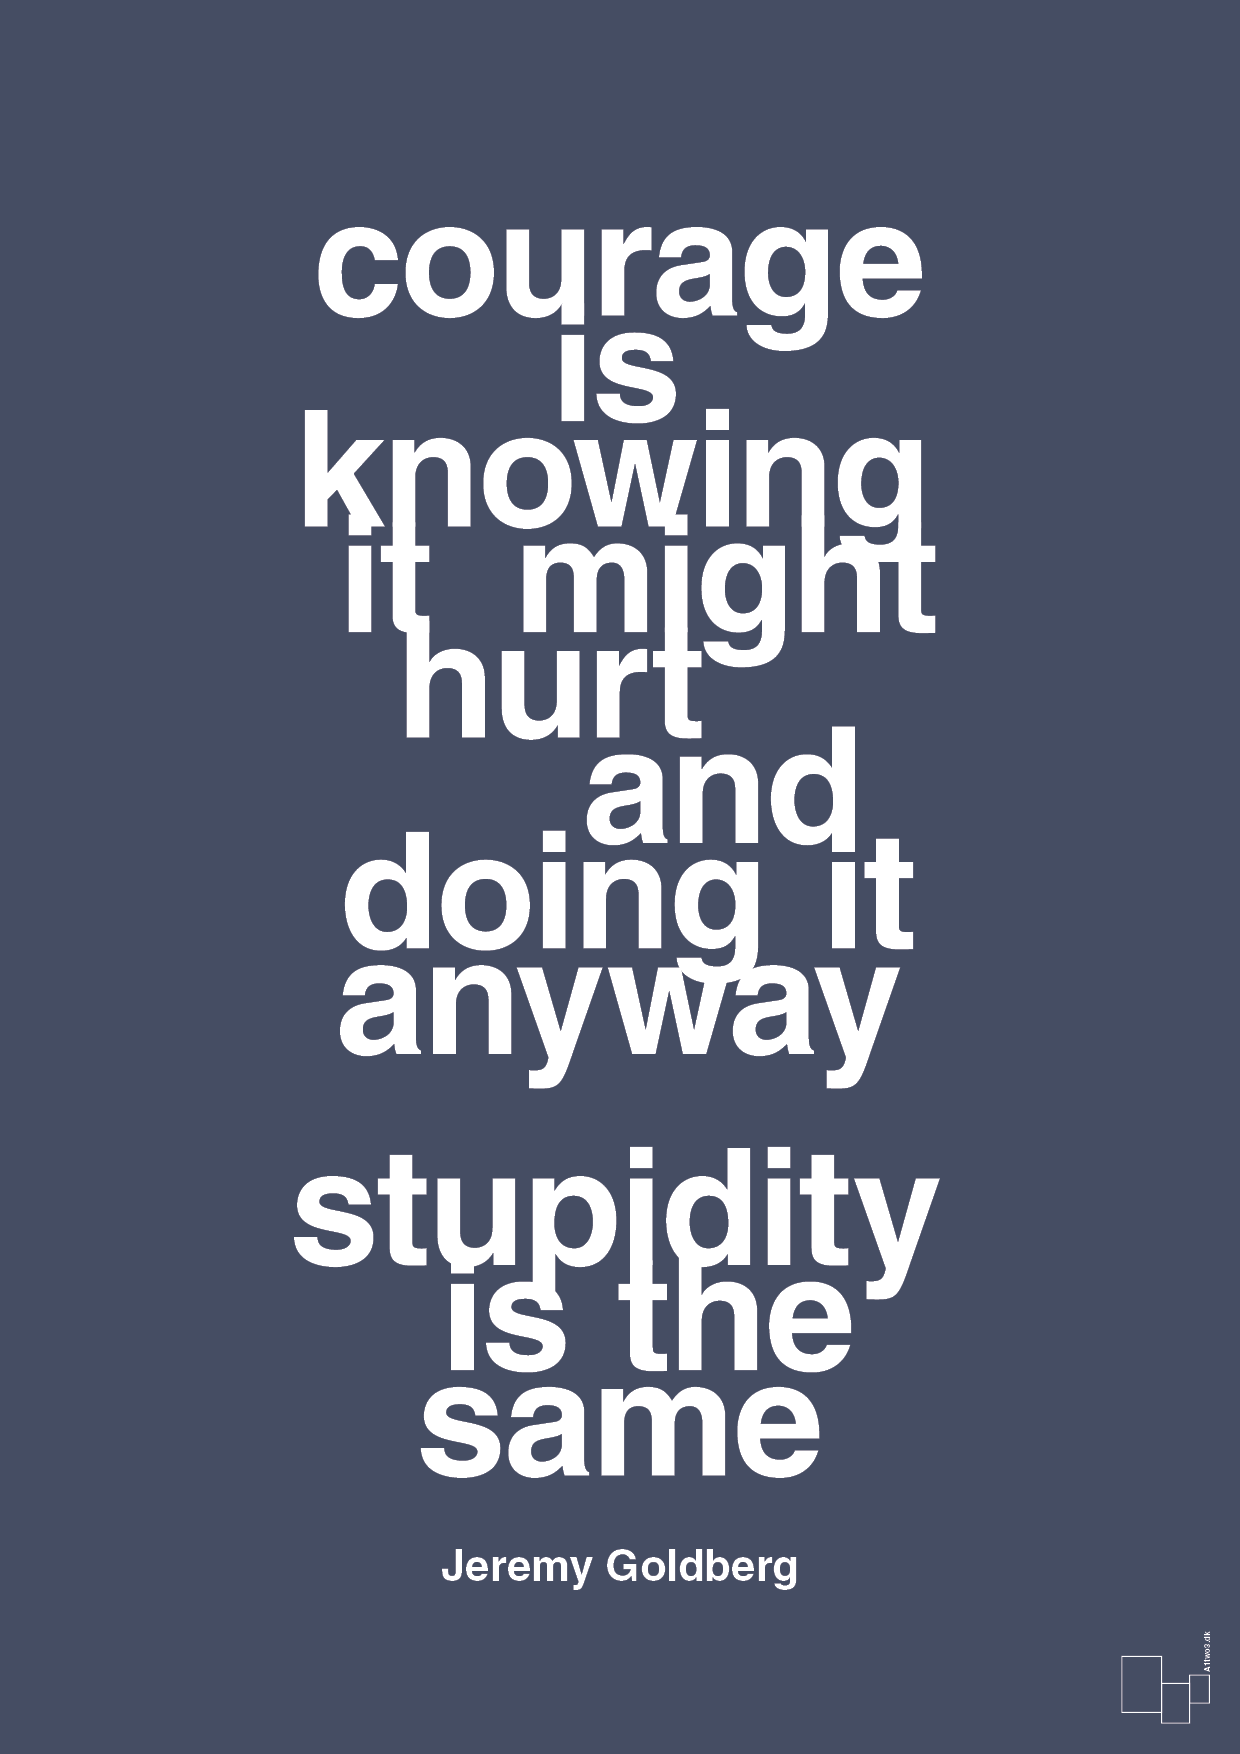 courage is knowing it might hurt and doing it anyway stupidity is the same - Plakat med Citater i Petrol